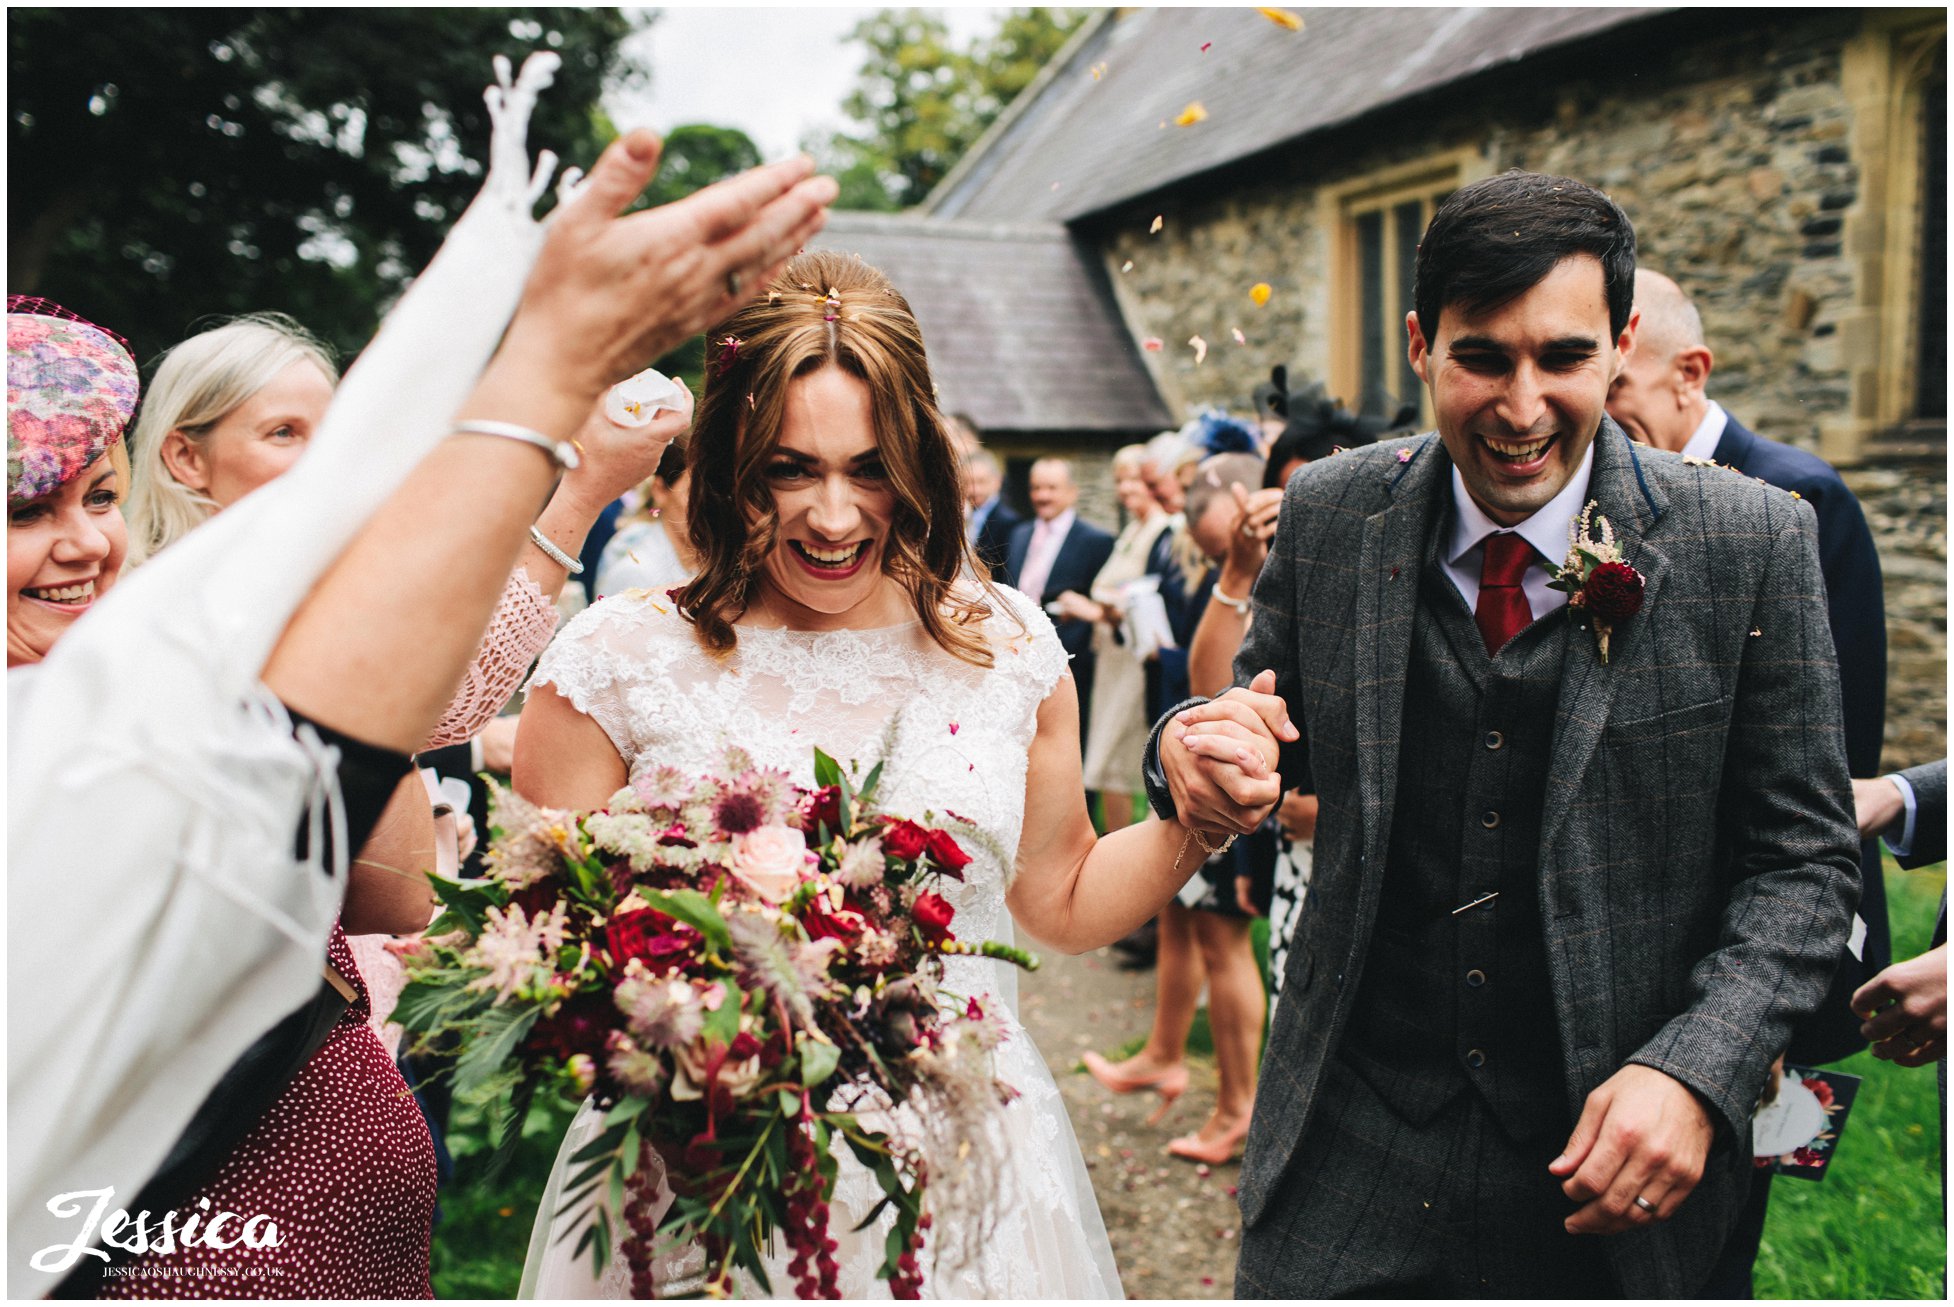 the couple are showered in confetti at Llantysilio church, north wales